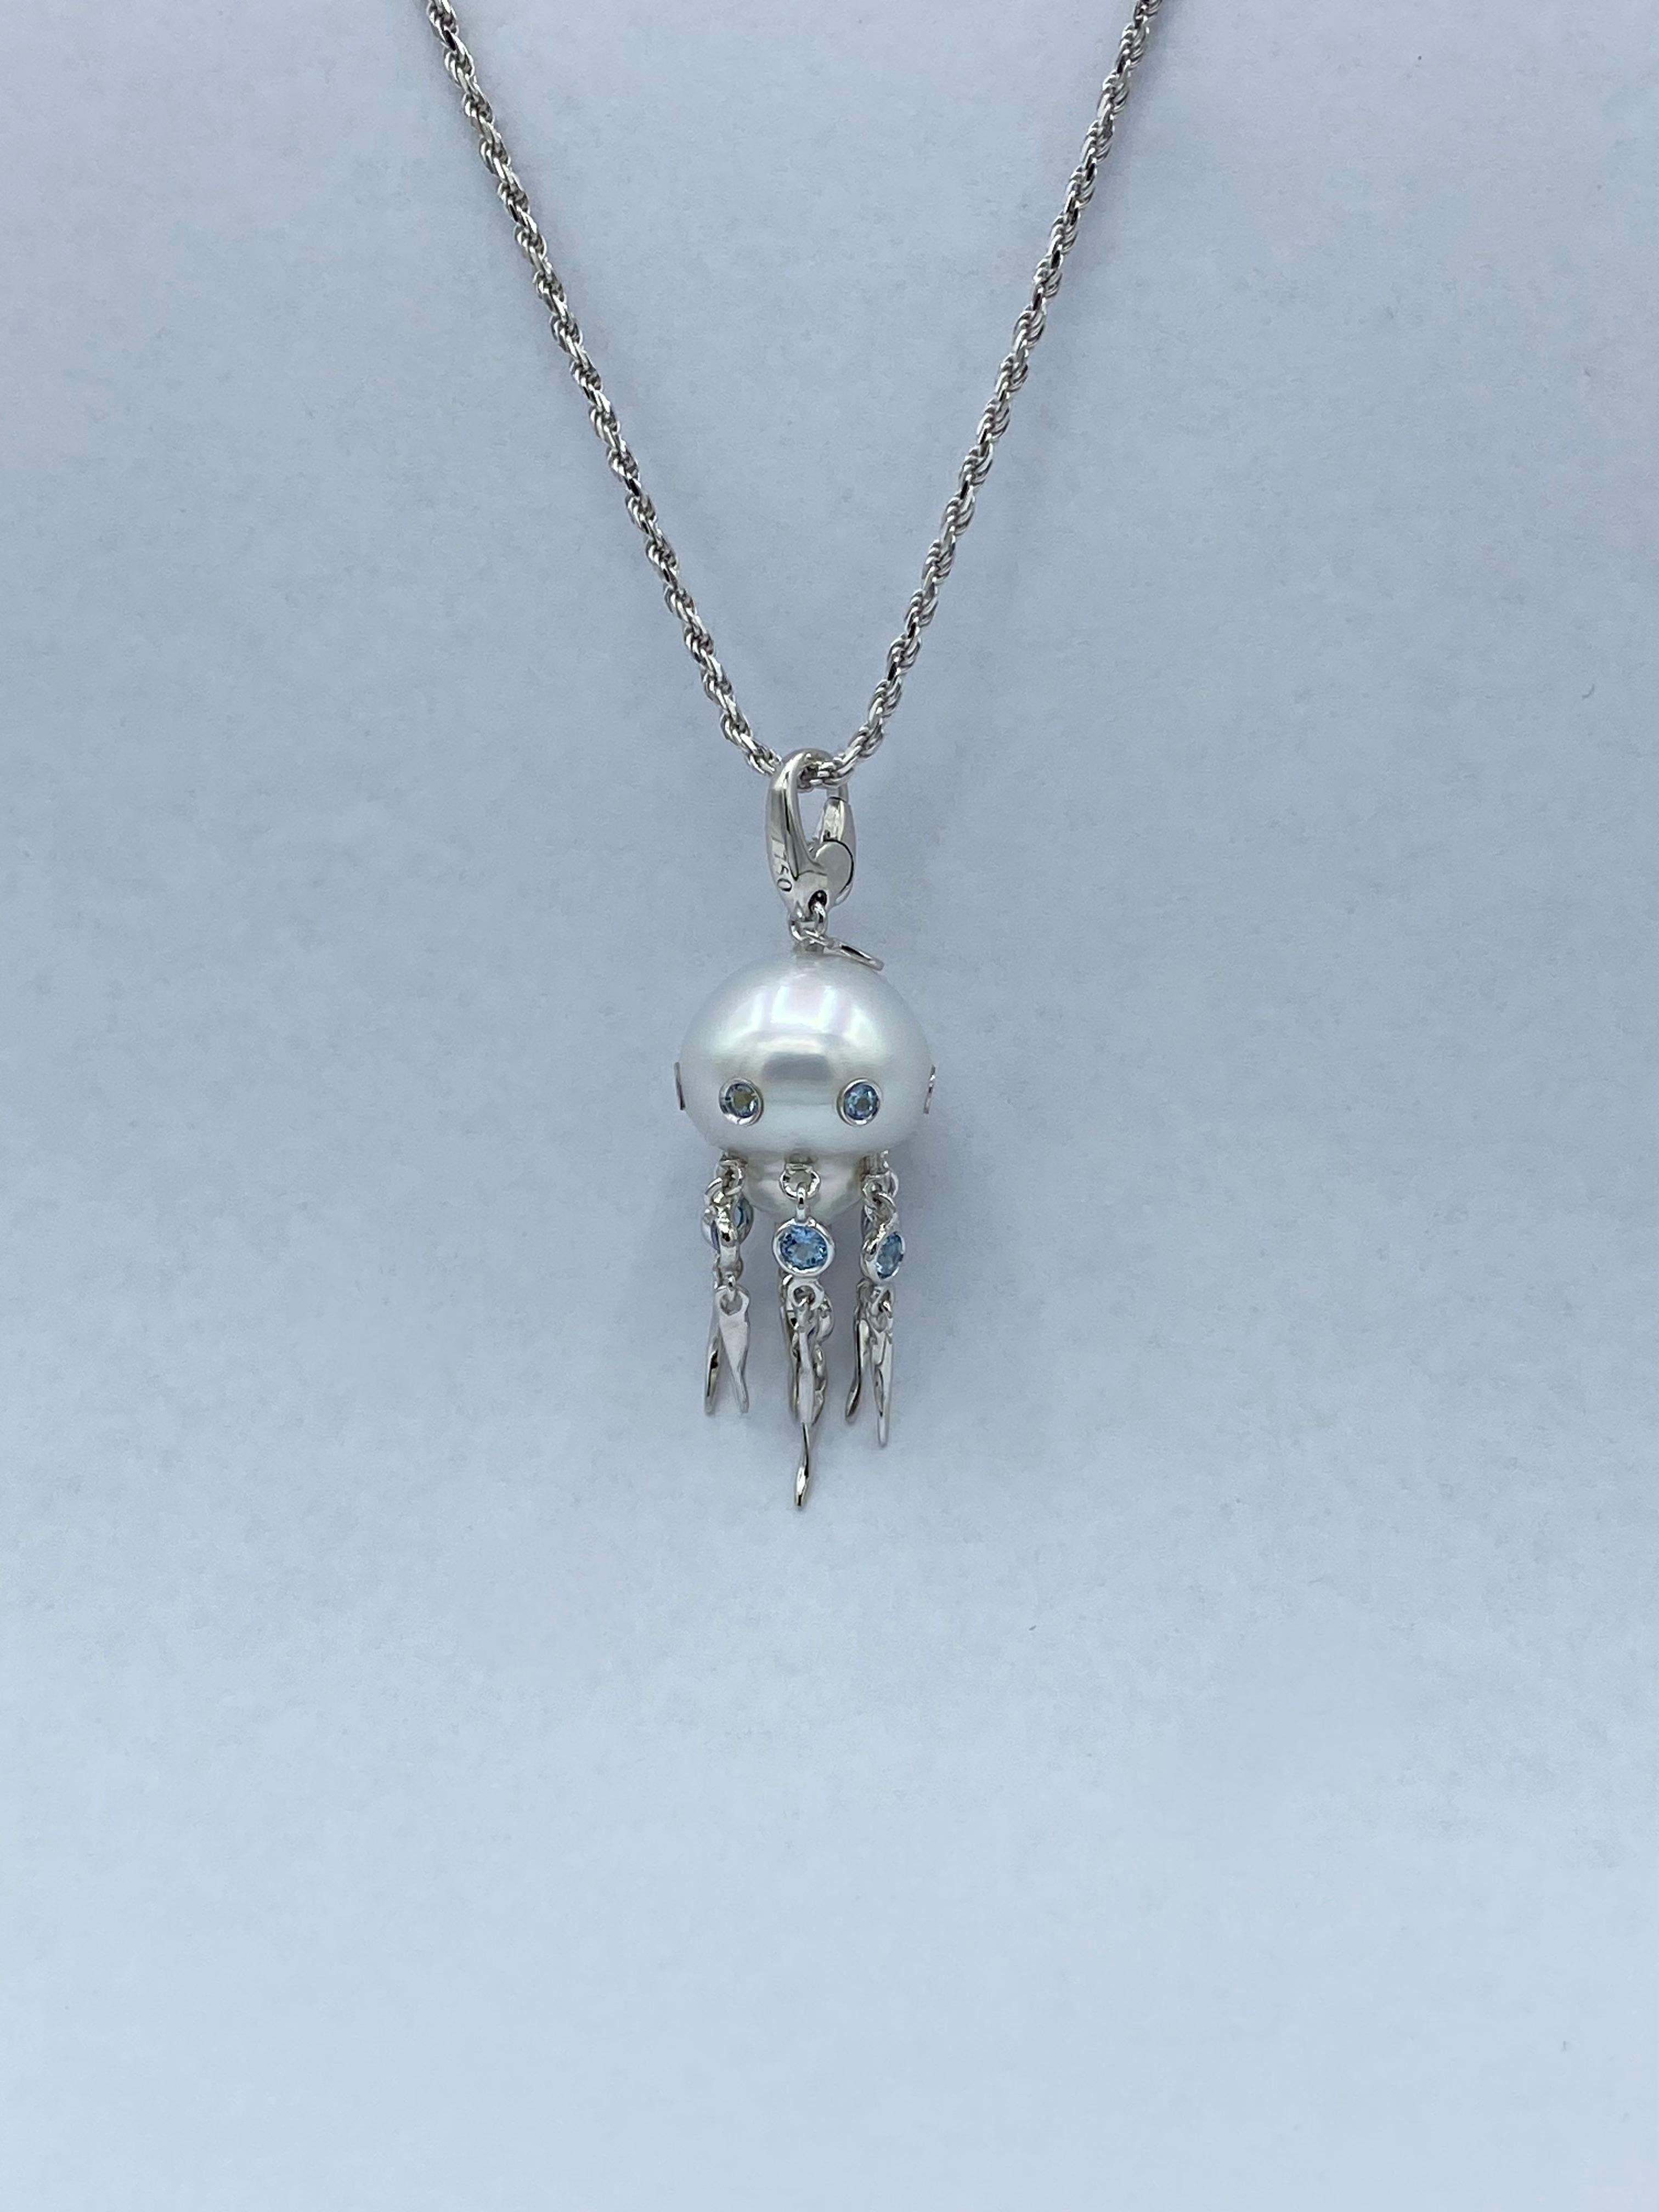 Jellyfish White Diamond Australian Pearl 18Kt White Gold Pendant/Necklace or Charm

It is a fascinating animal and symbolizes the flow of life, it encourages us not to resist changes. Like an animal that delves into the depths of the abyss, it